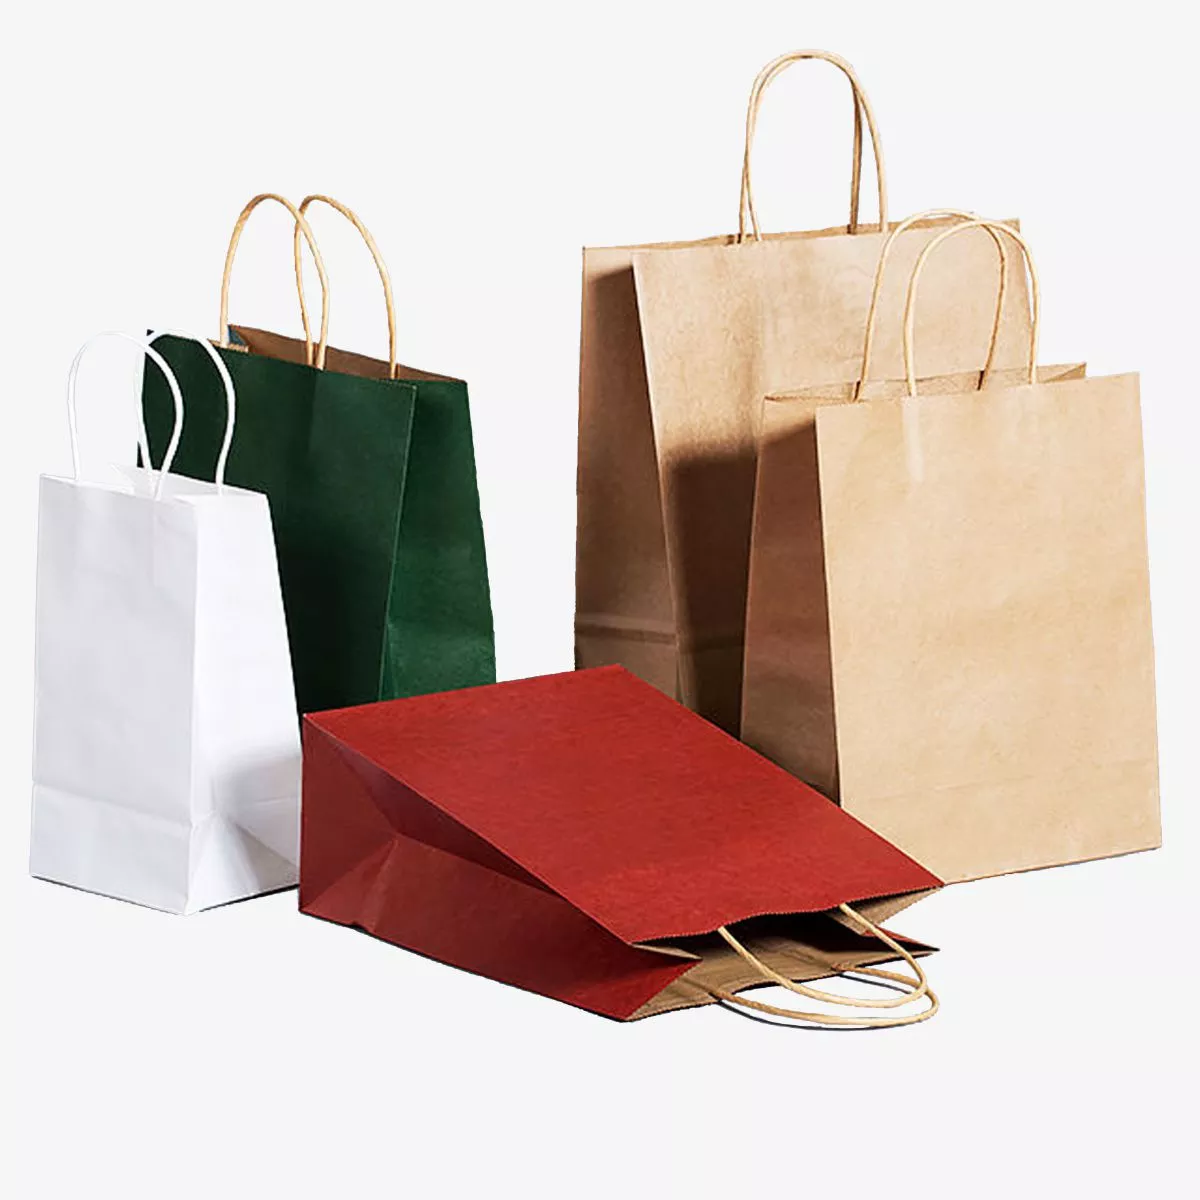 Recyclable high quality paper bag